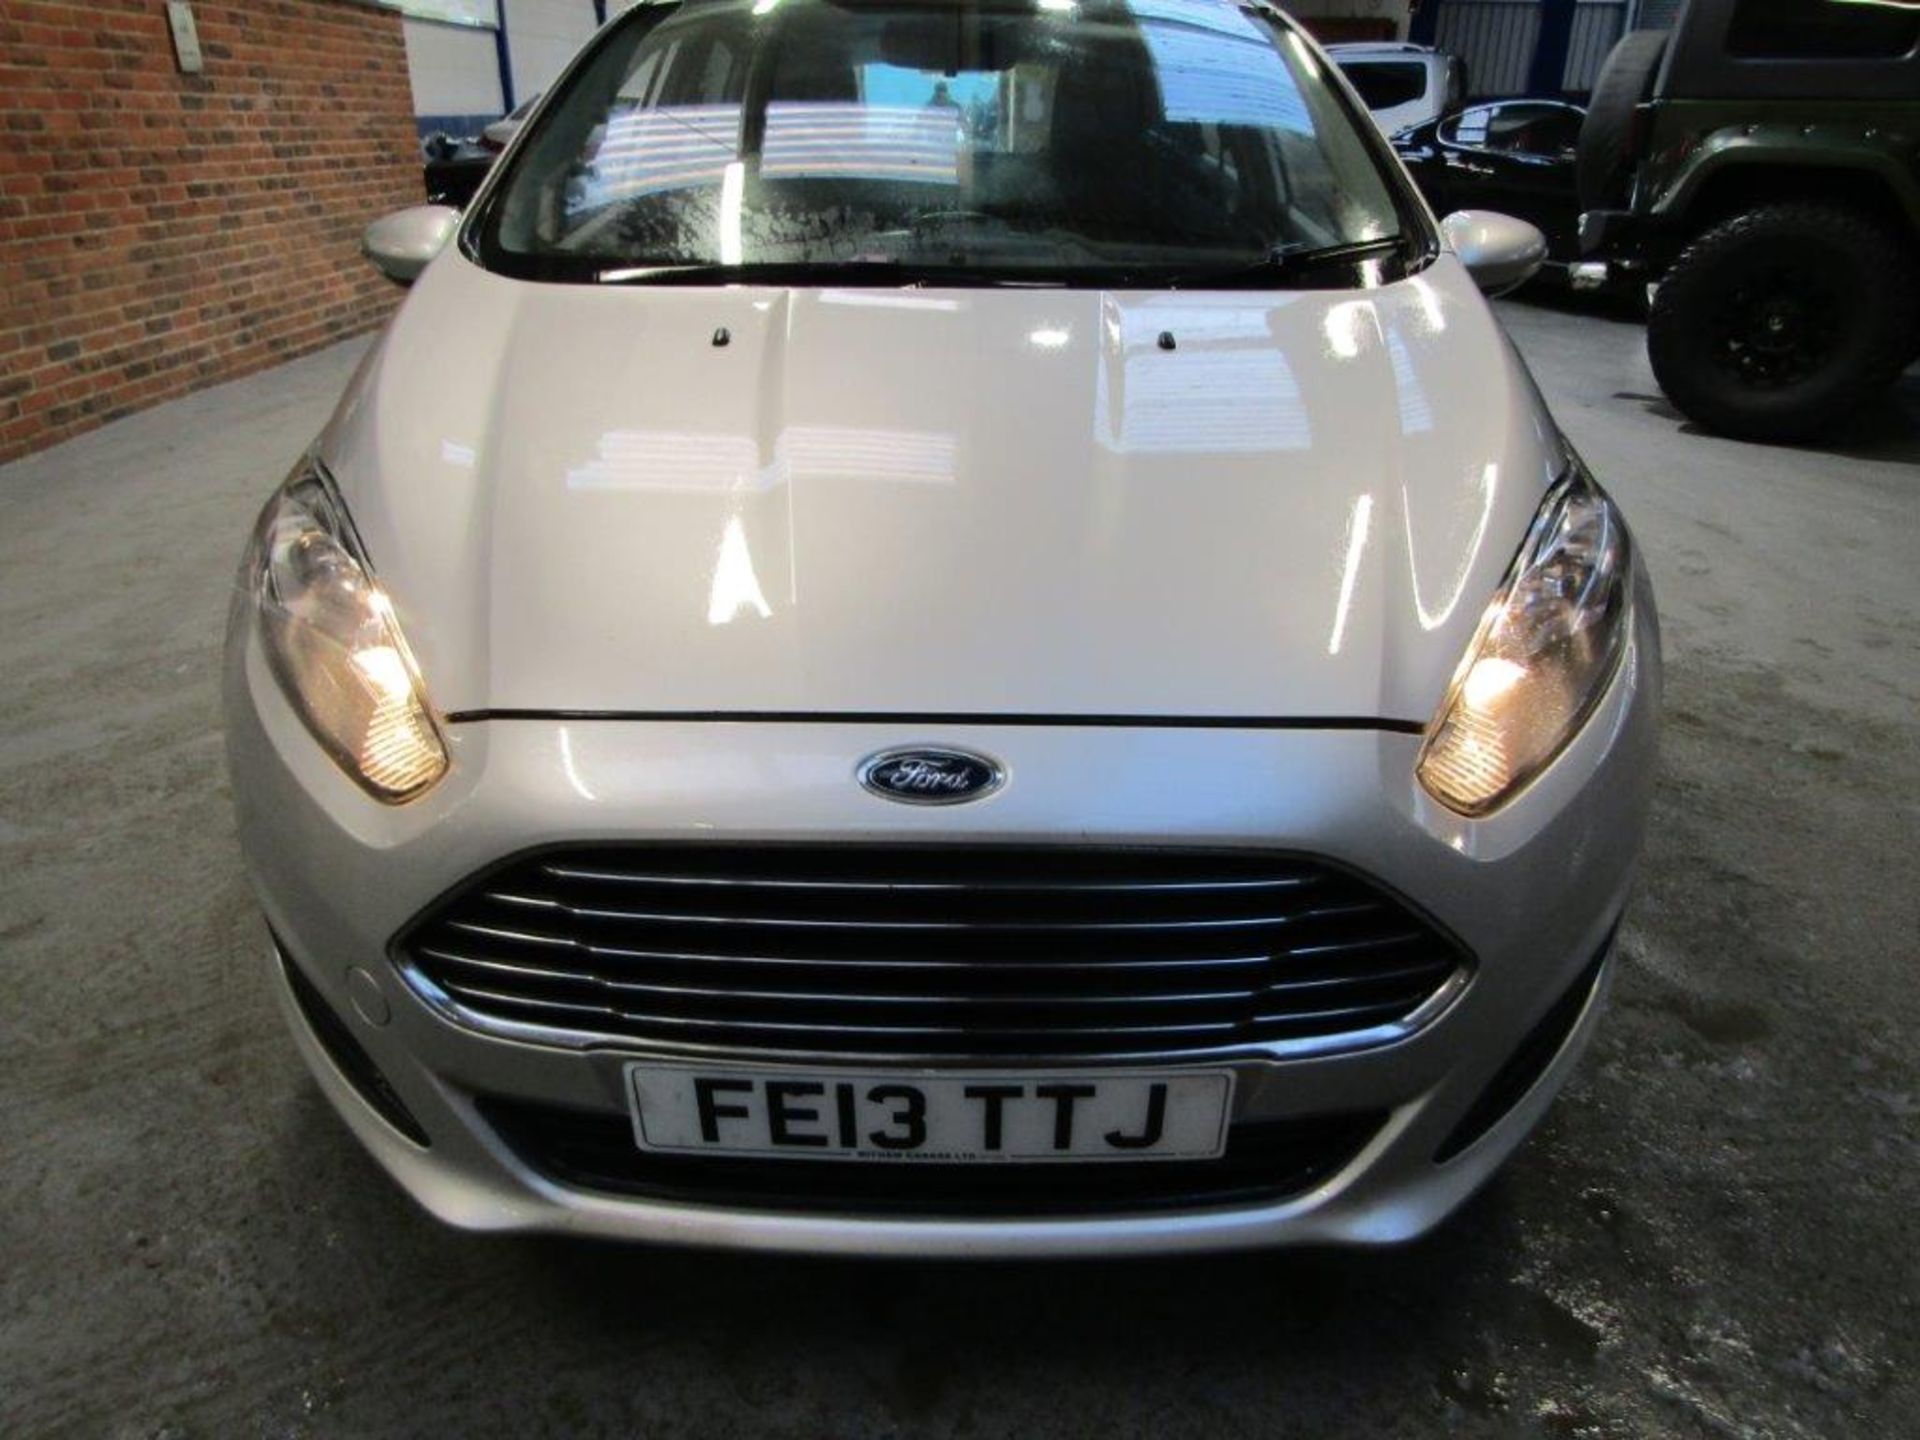 13 13 Ford Fiesta Style Eco TDCI - Image 7 of 22